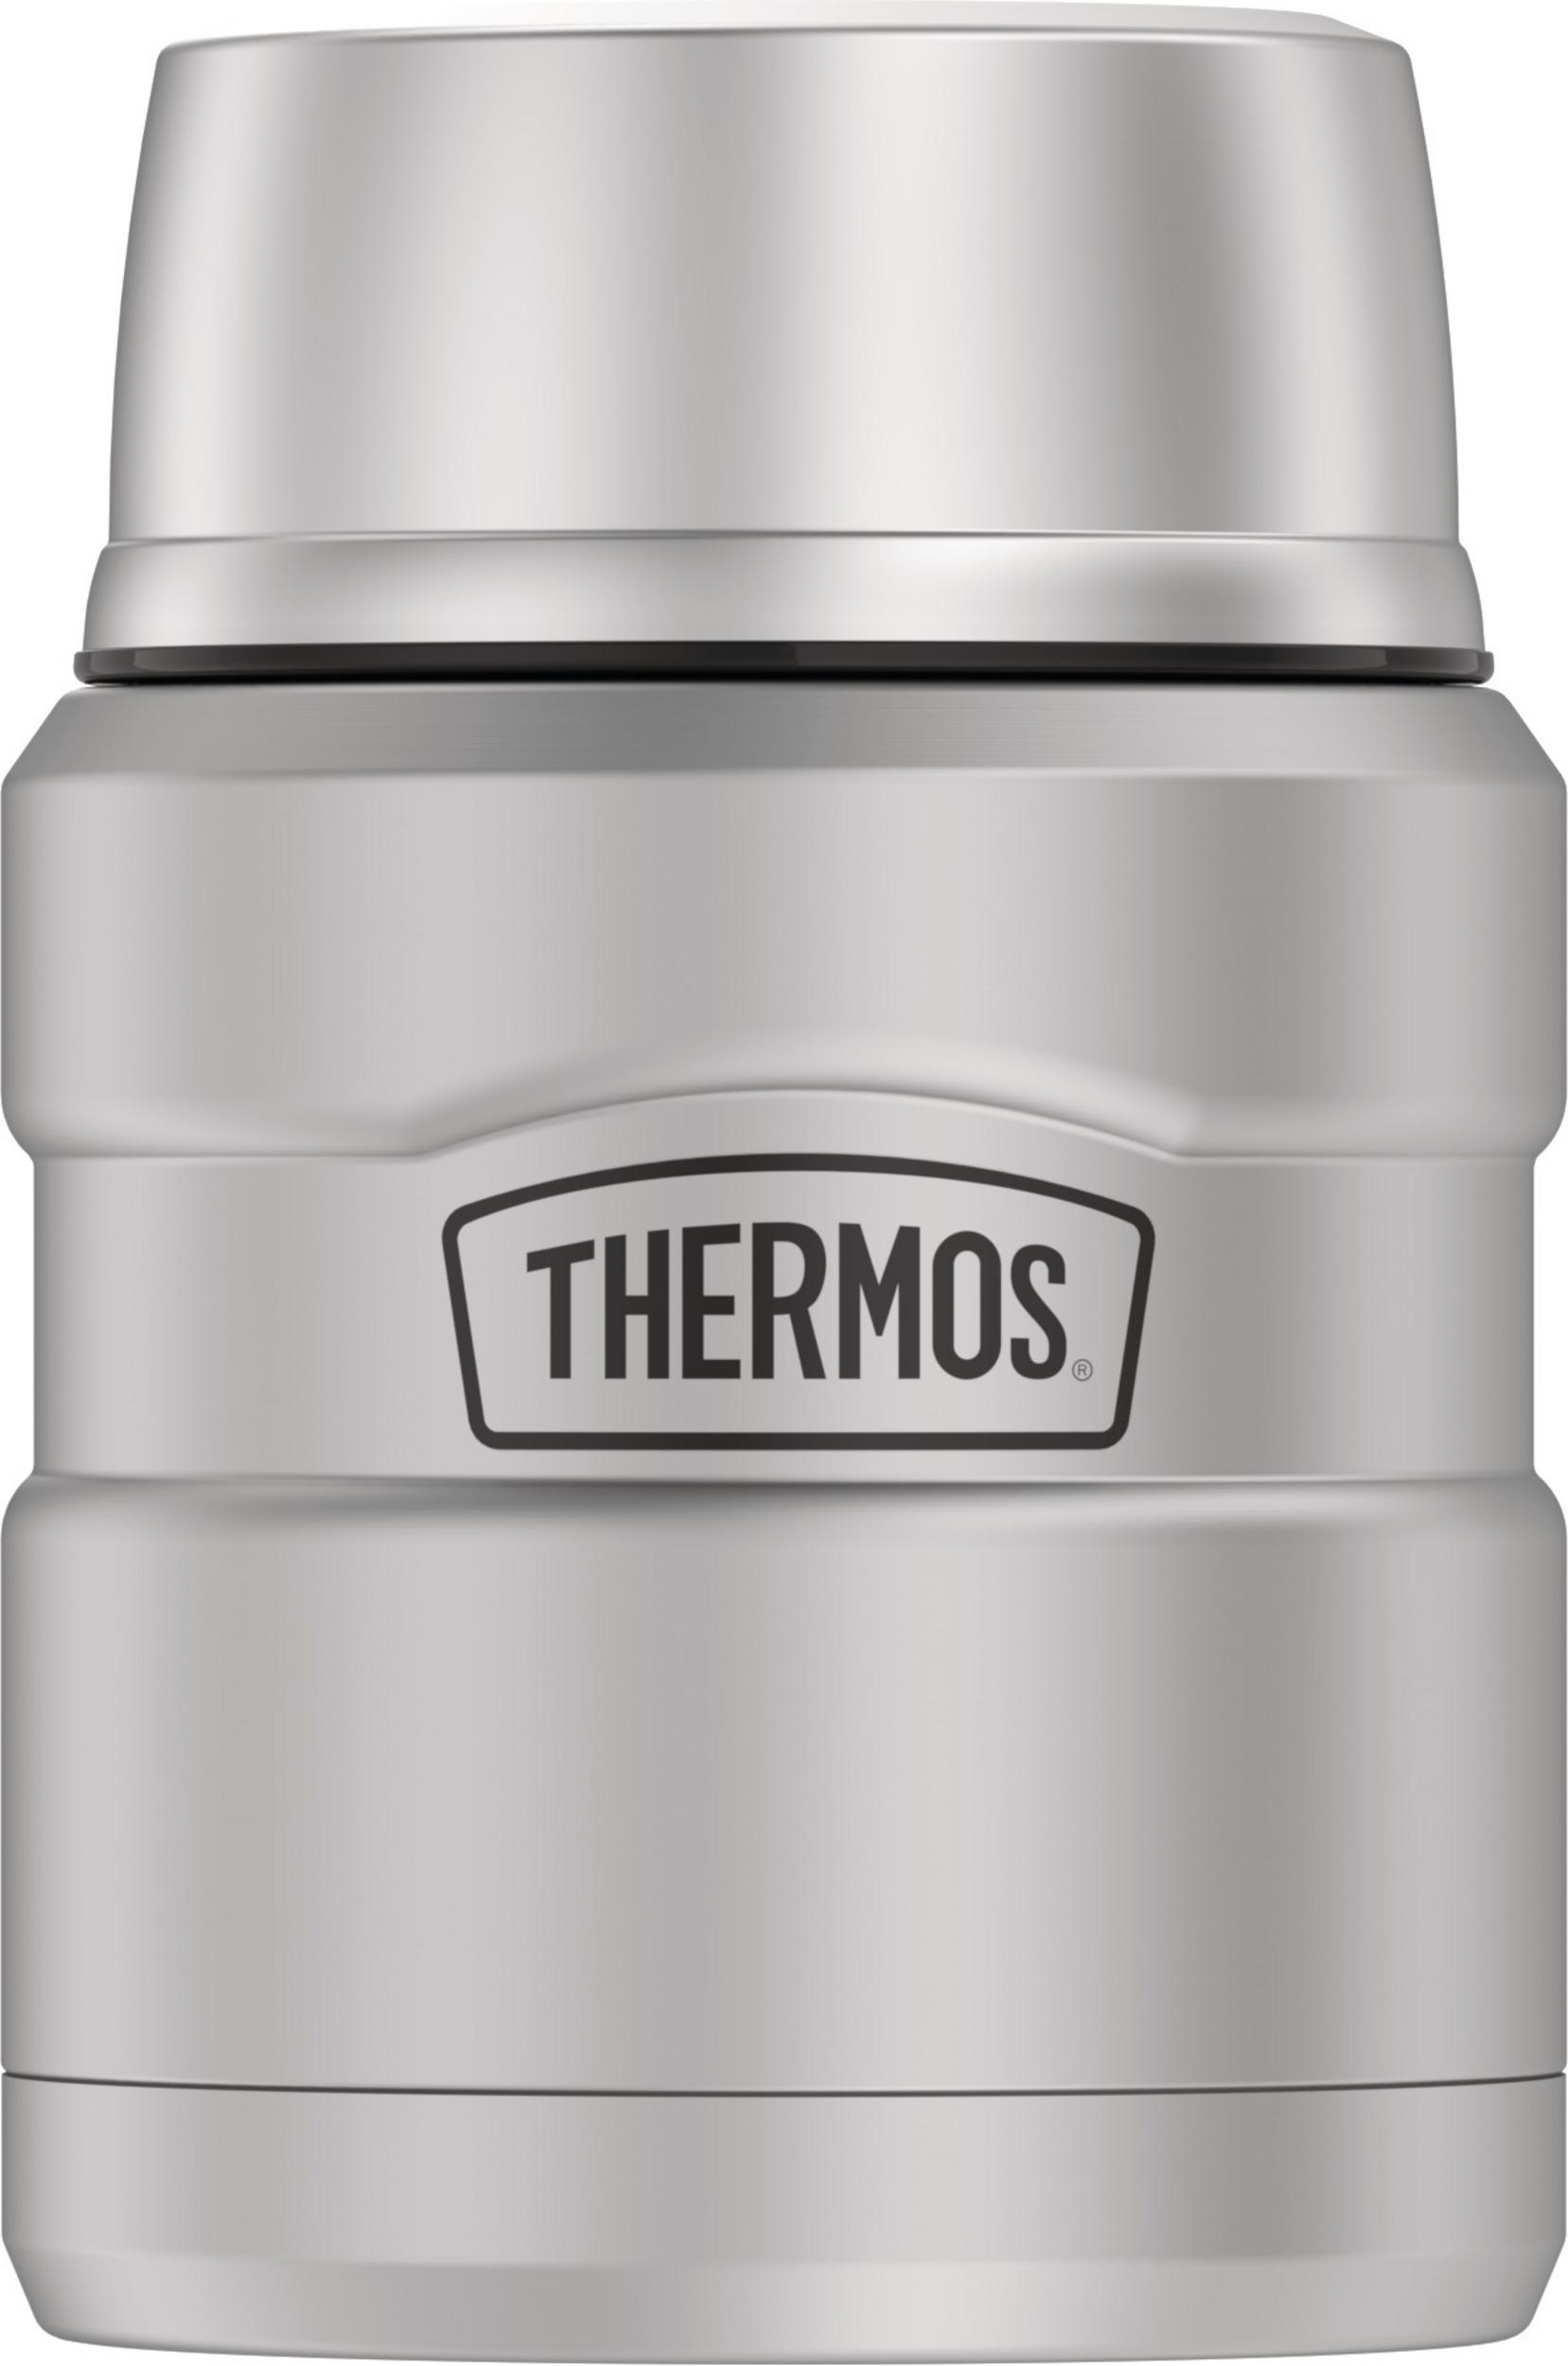 Thermos 16oz Funtainer Food Jar with Spoon - Apricot